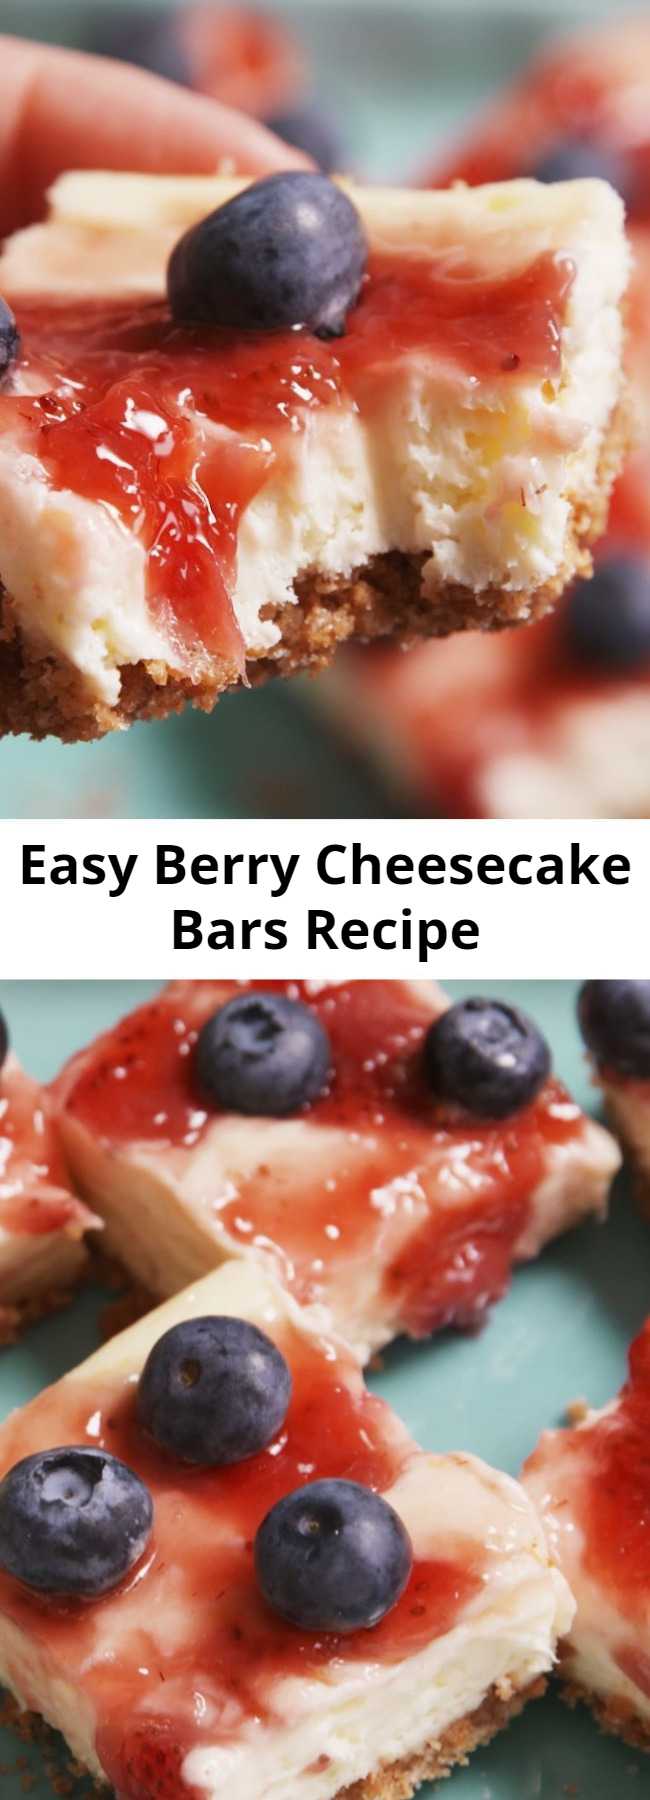 Easy Berry Cheesecake Bars Recipe - Treat yourself to a piece of creamy, fruity goodness.